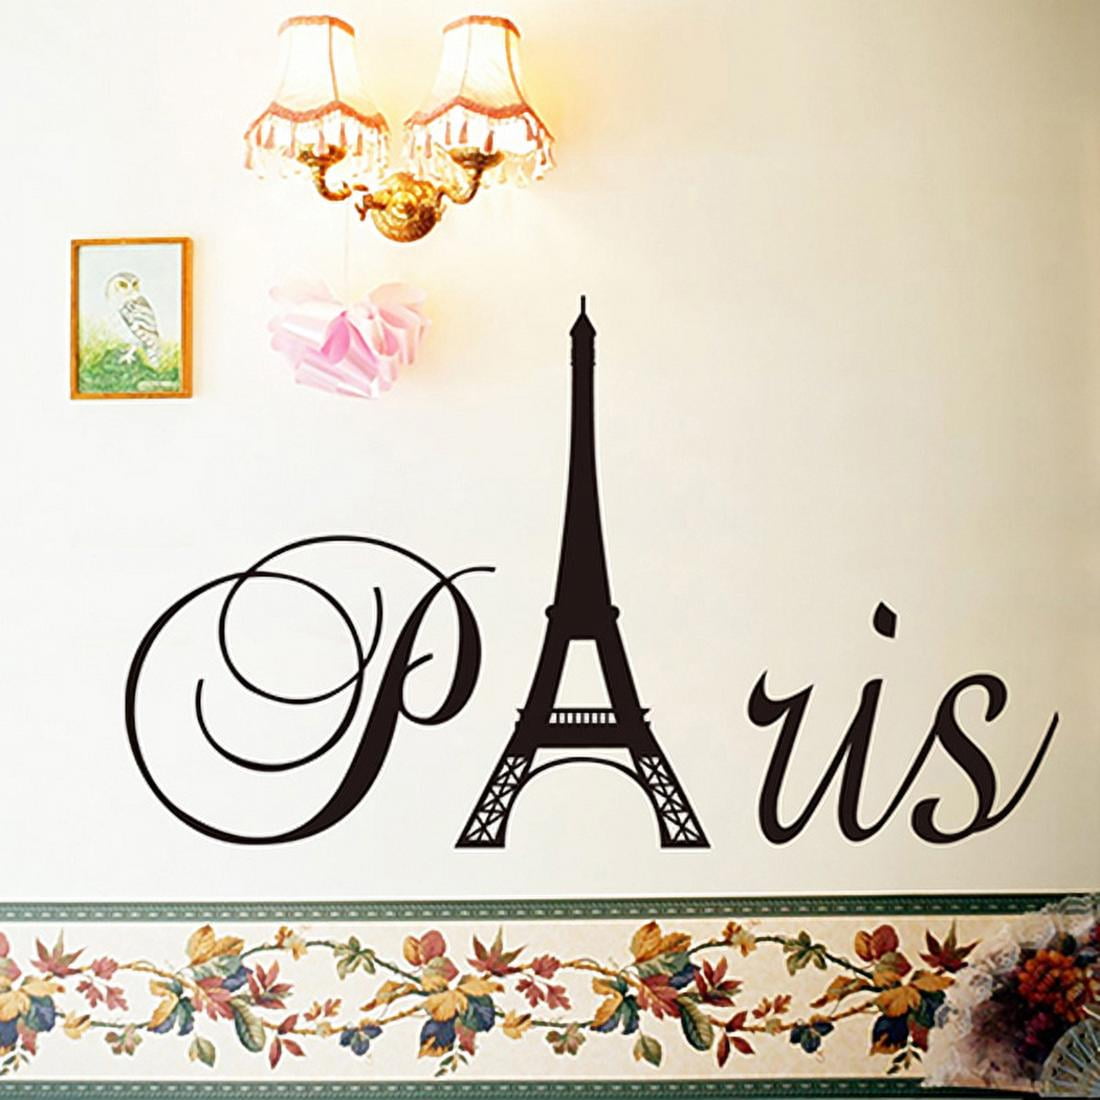 Large Eiffel Tower Wall Decal. Paris France Home Decor. Edge to Edge. item  #OS_MG102